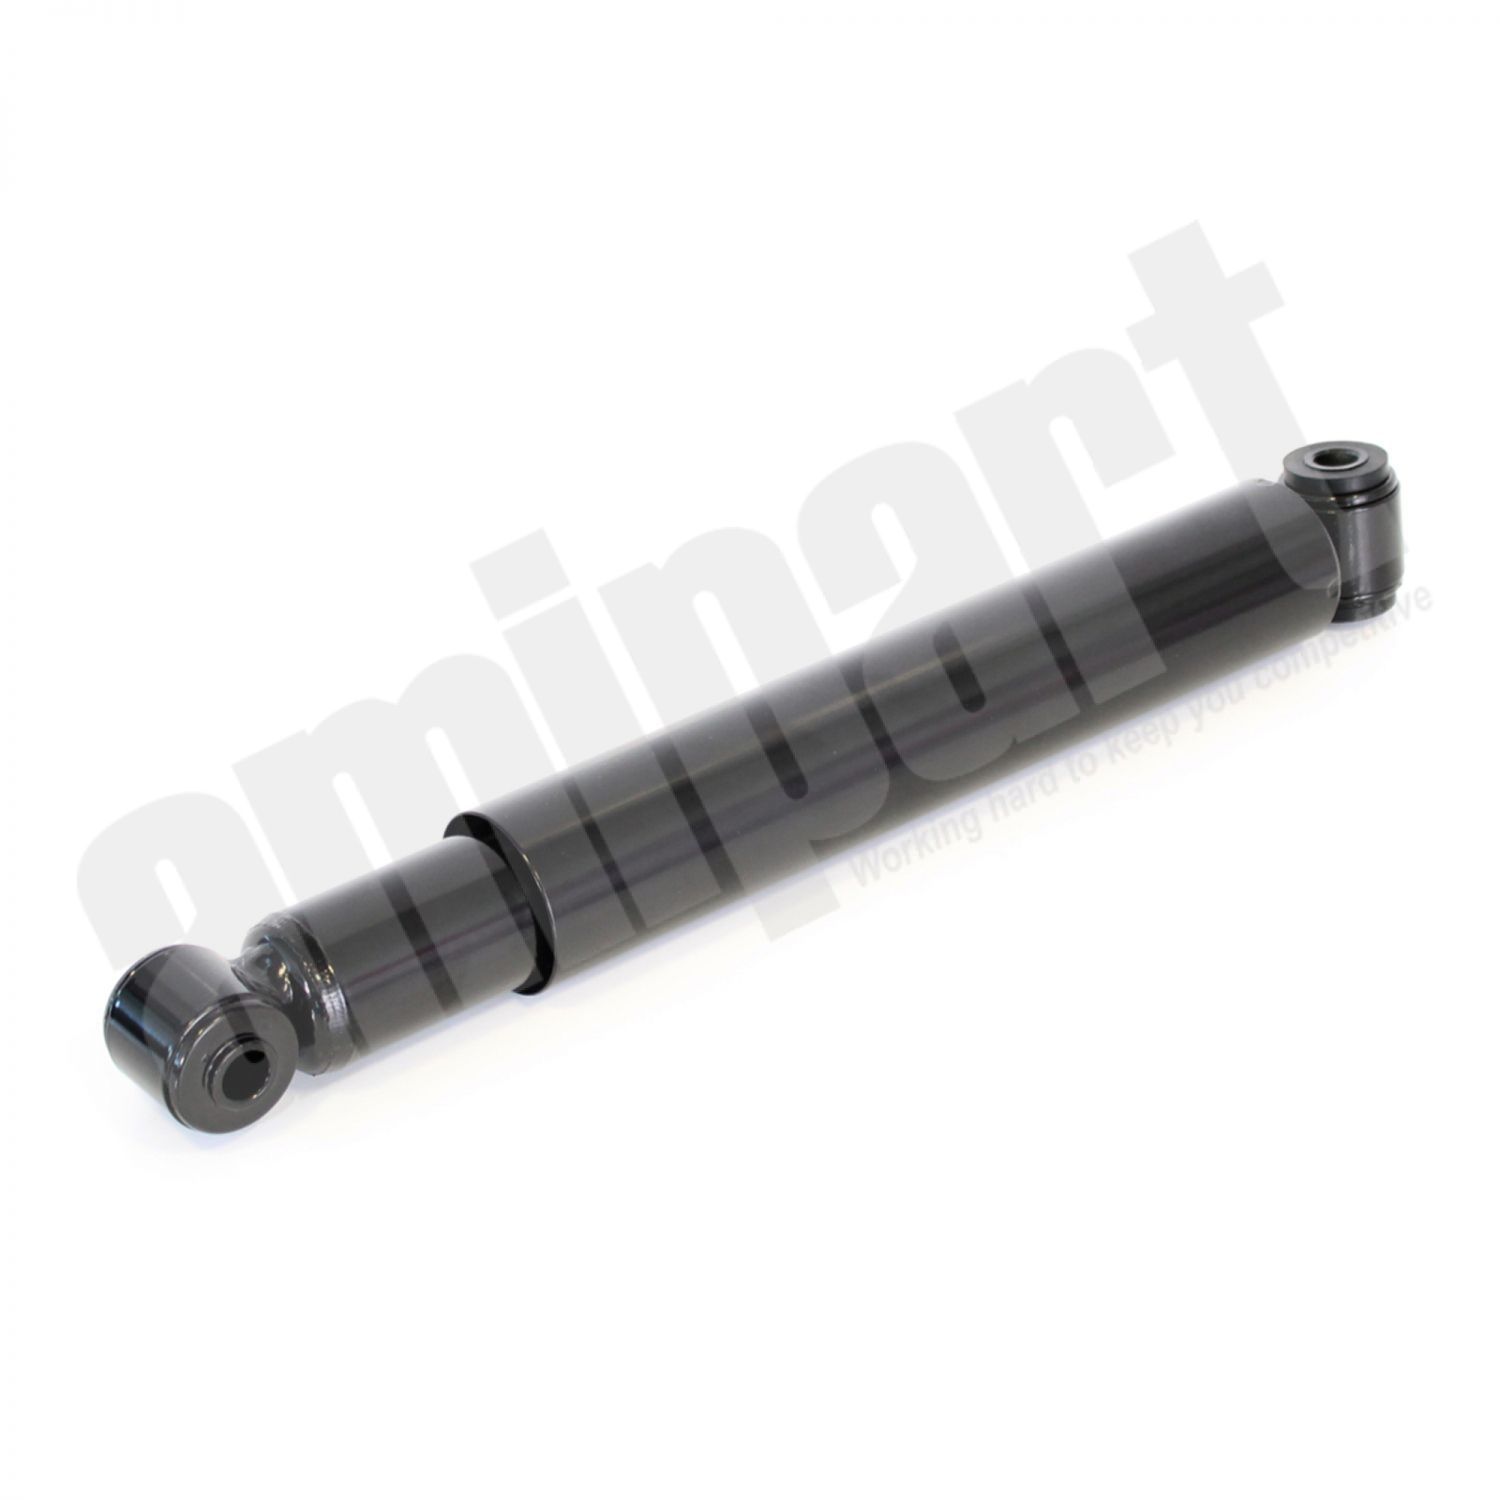 Amipart - BPW AXLE SHOCK ABSORBER 